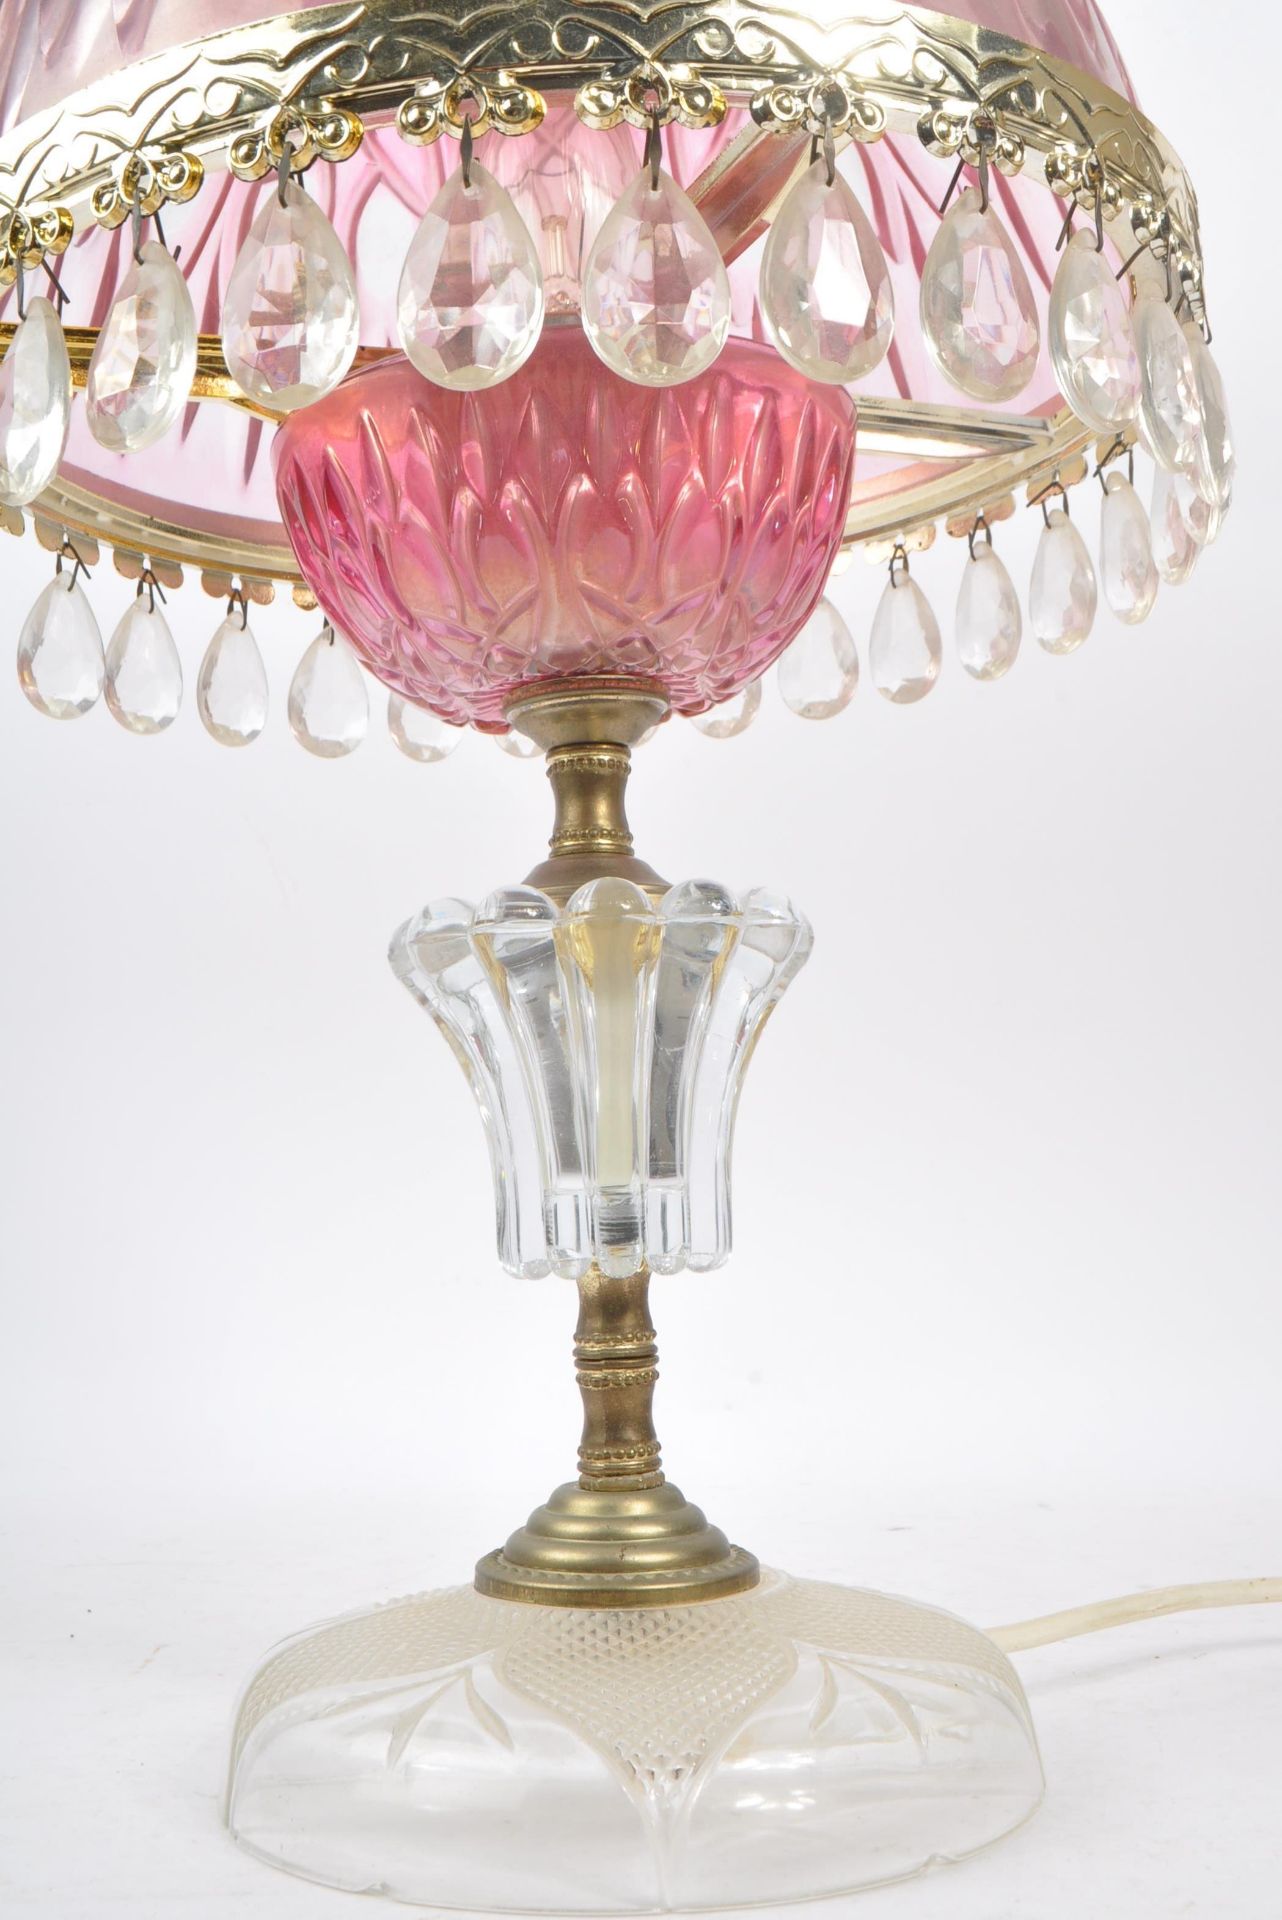 MICHELOTTI - VINTAGE CRYSTAL CRANBERRY PARLOUR LAMP - Image 4 of 5